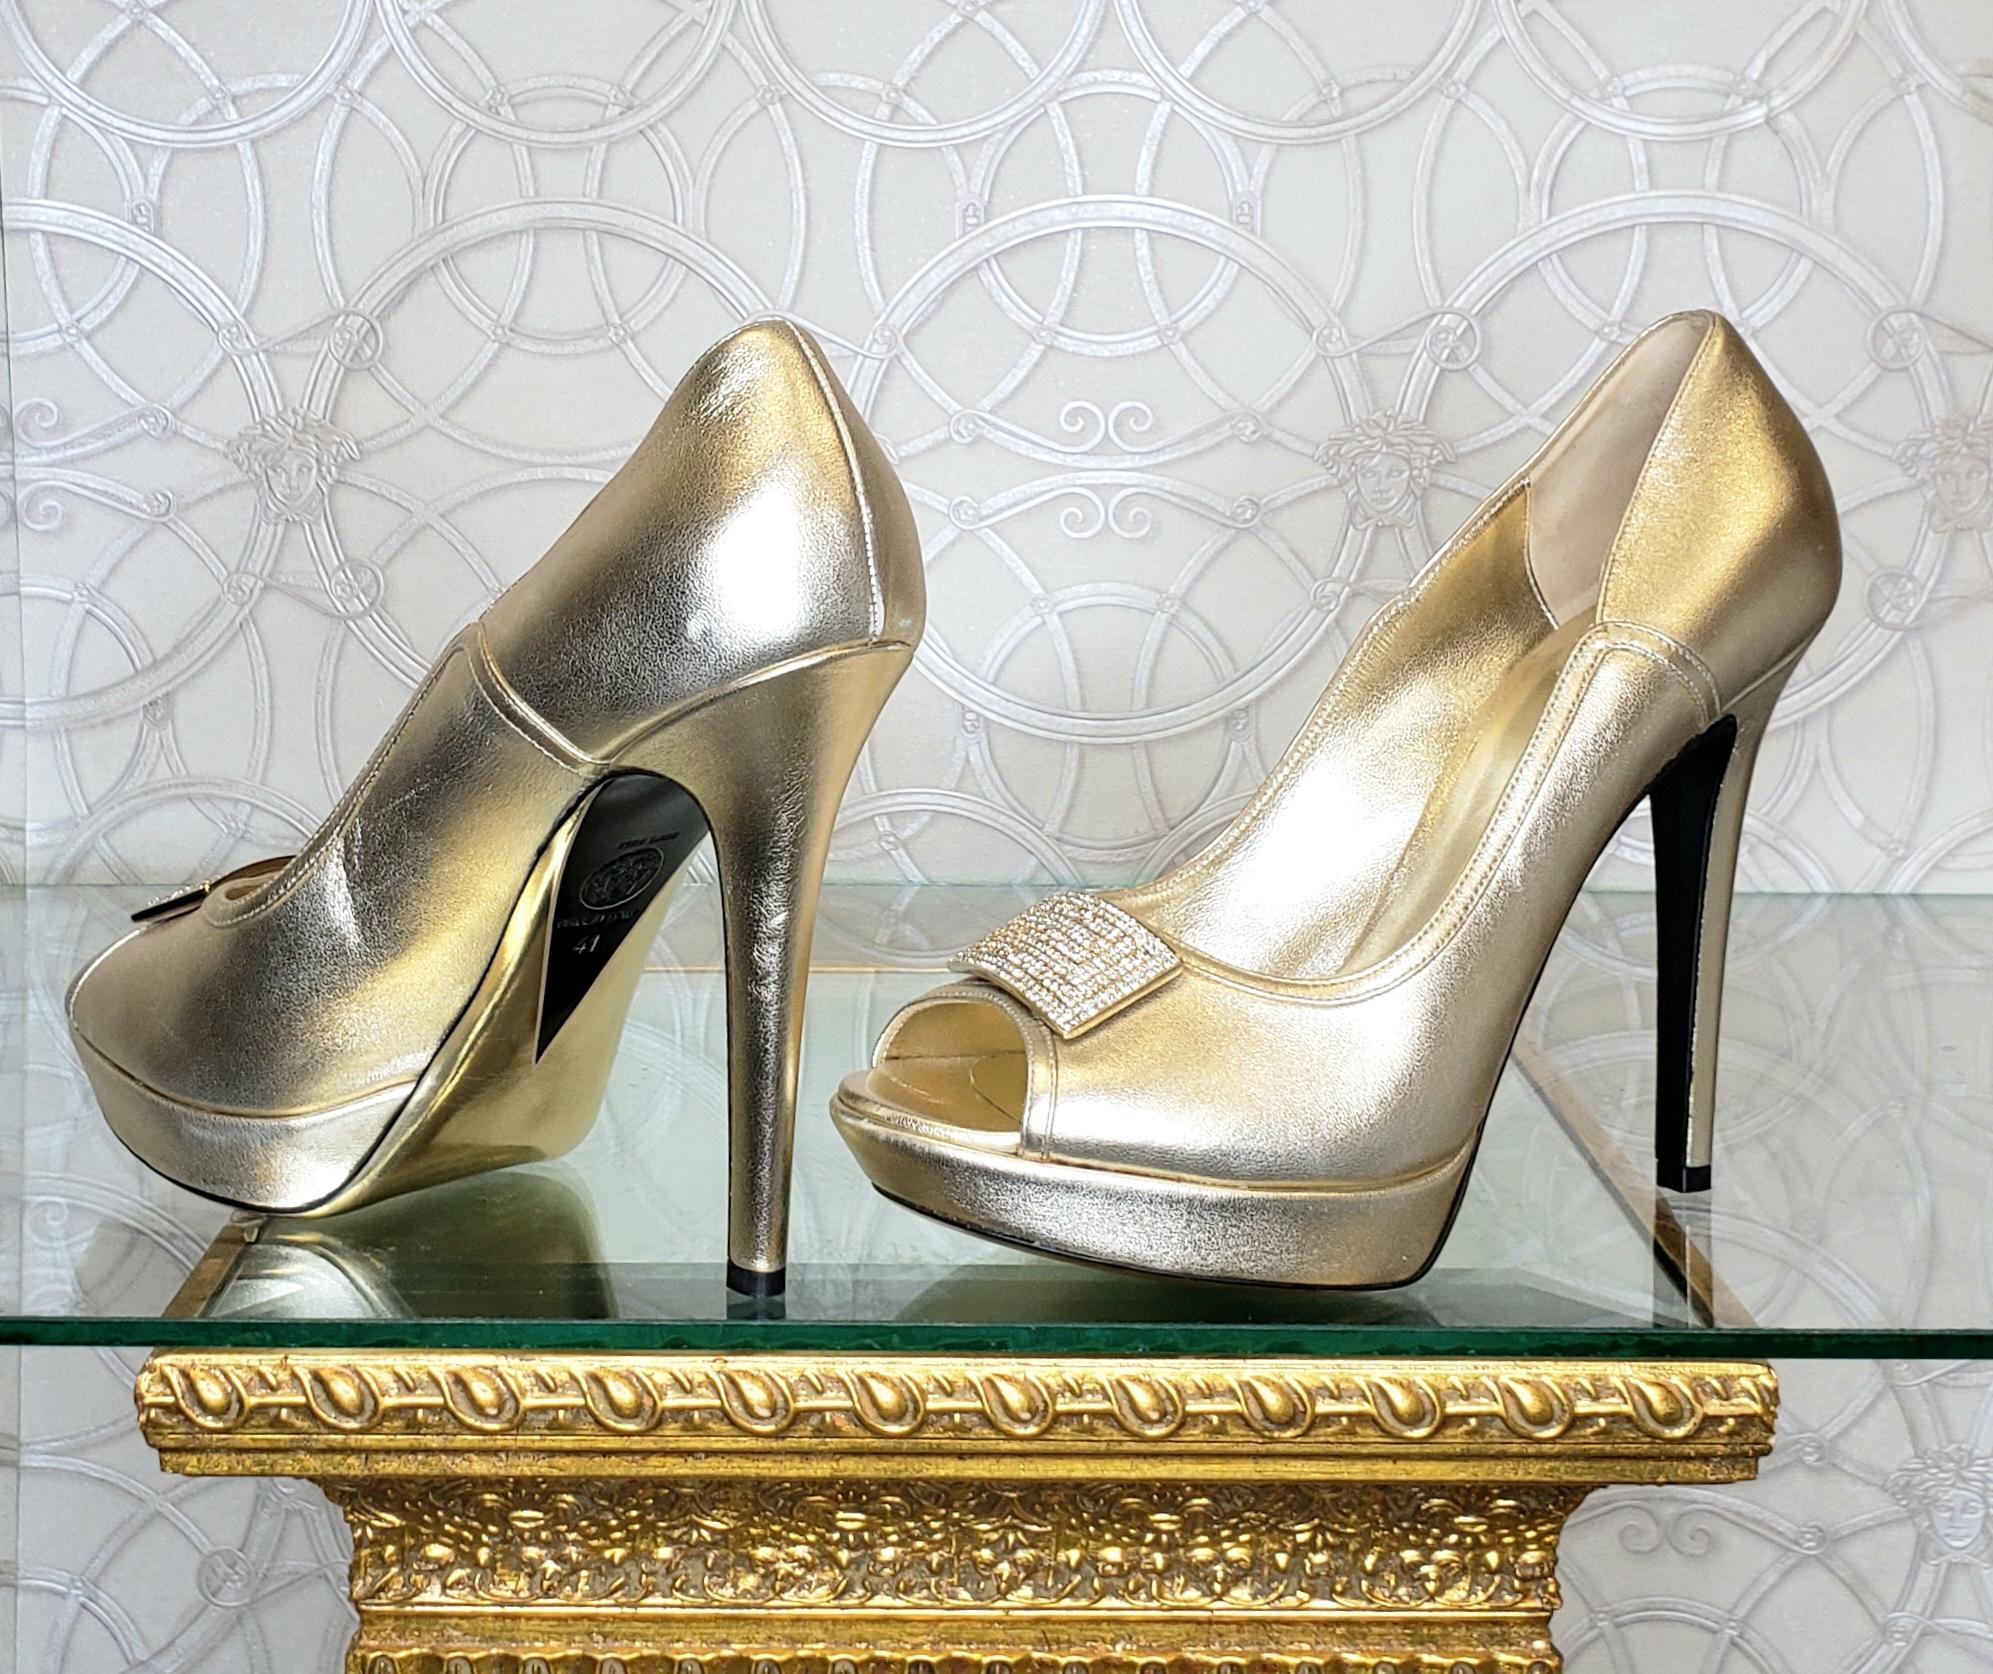 VERSACE 

Crafted with a crystal studded Greek Key logo, 

Versace's gold leather pumps are sure to top every fashionista's wish list. 

Complement the luxe hue with rich jewel tones to complete a glamorous evening look.

Color: Metallic